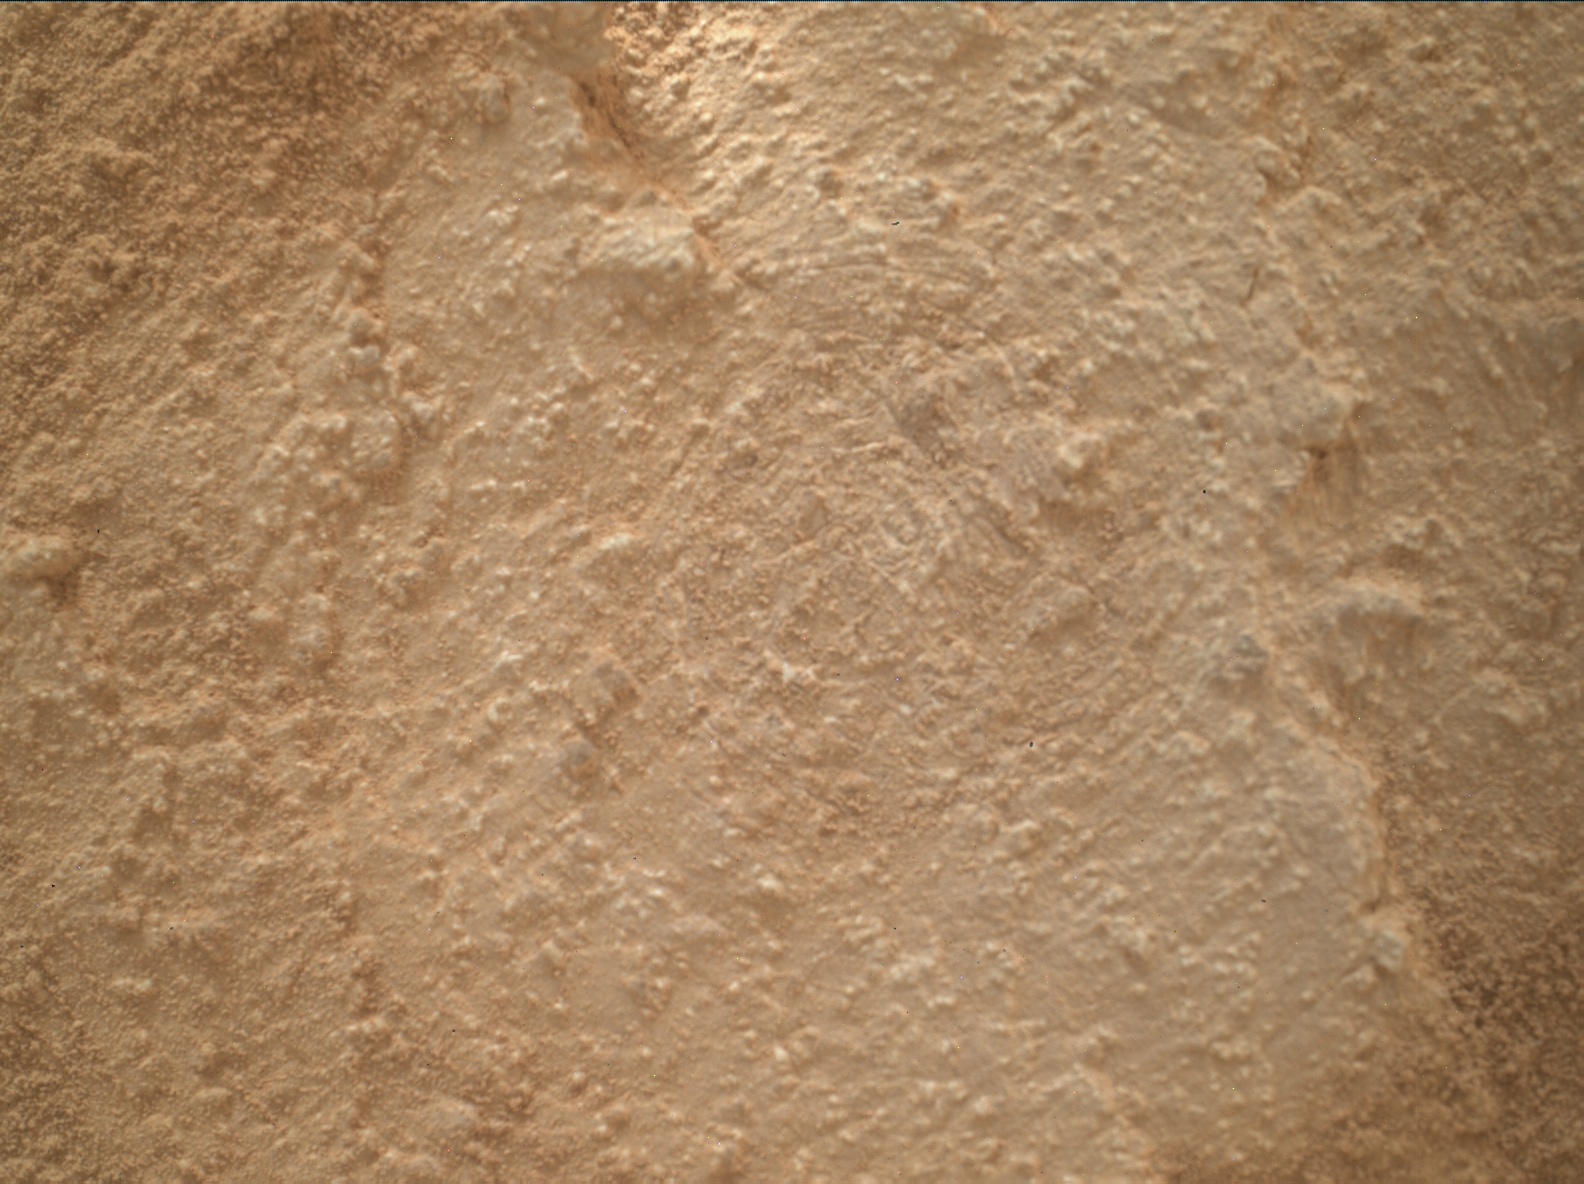 Nasa's Mars rover Curiosity acquired this image using its Mars Hand Lens Imager (MAHLI) on Sol 3859